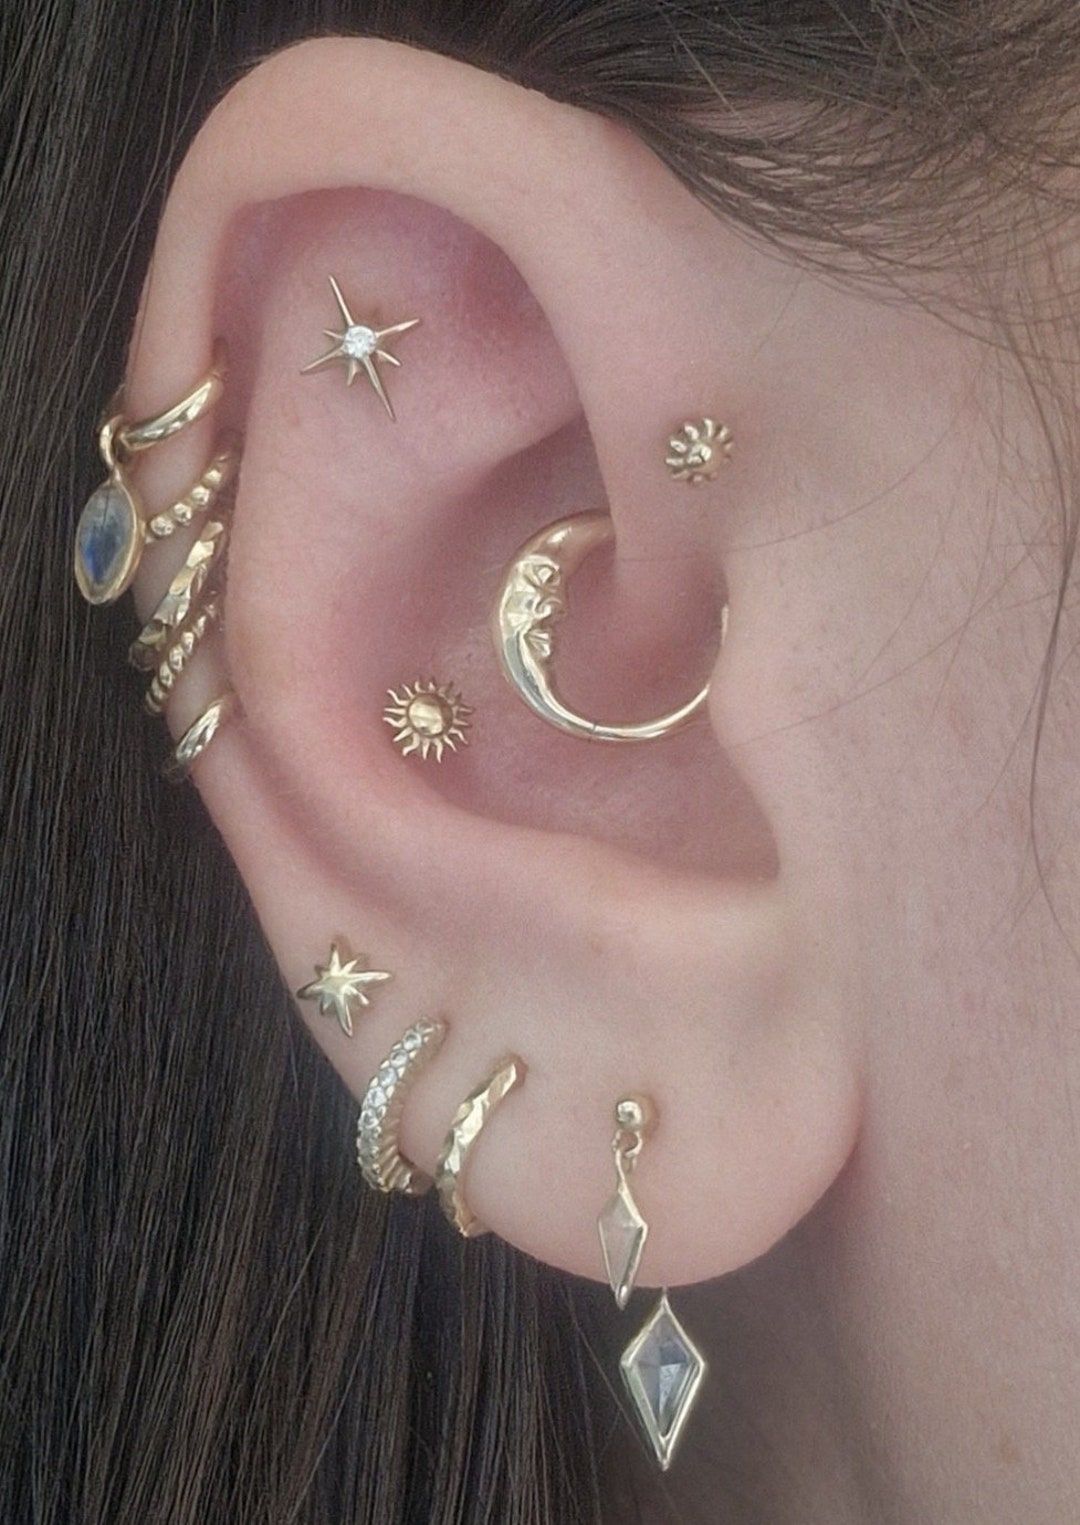 Celebrity Ear Piercings: Get Inspired by
the Stars